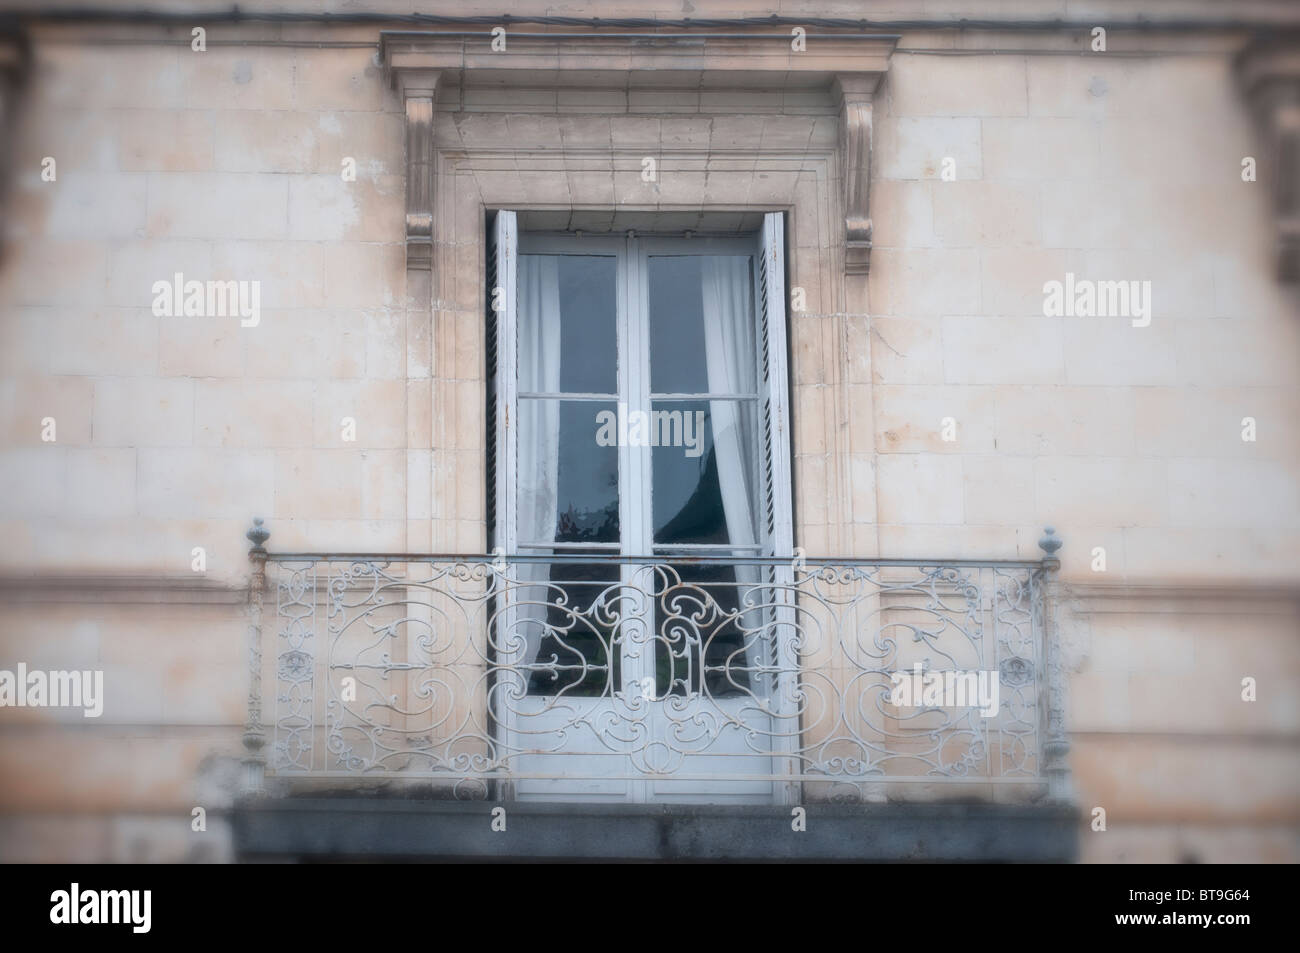 The window and balcony of an old house Stock Photo